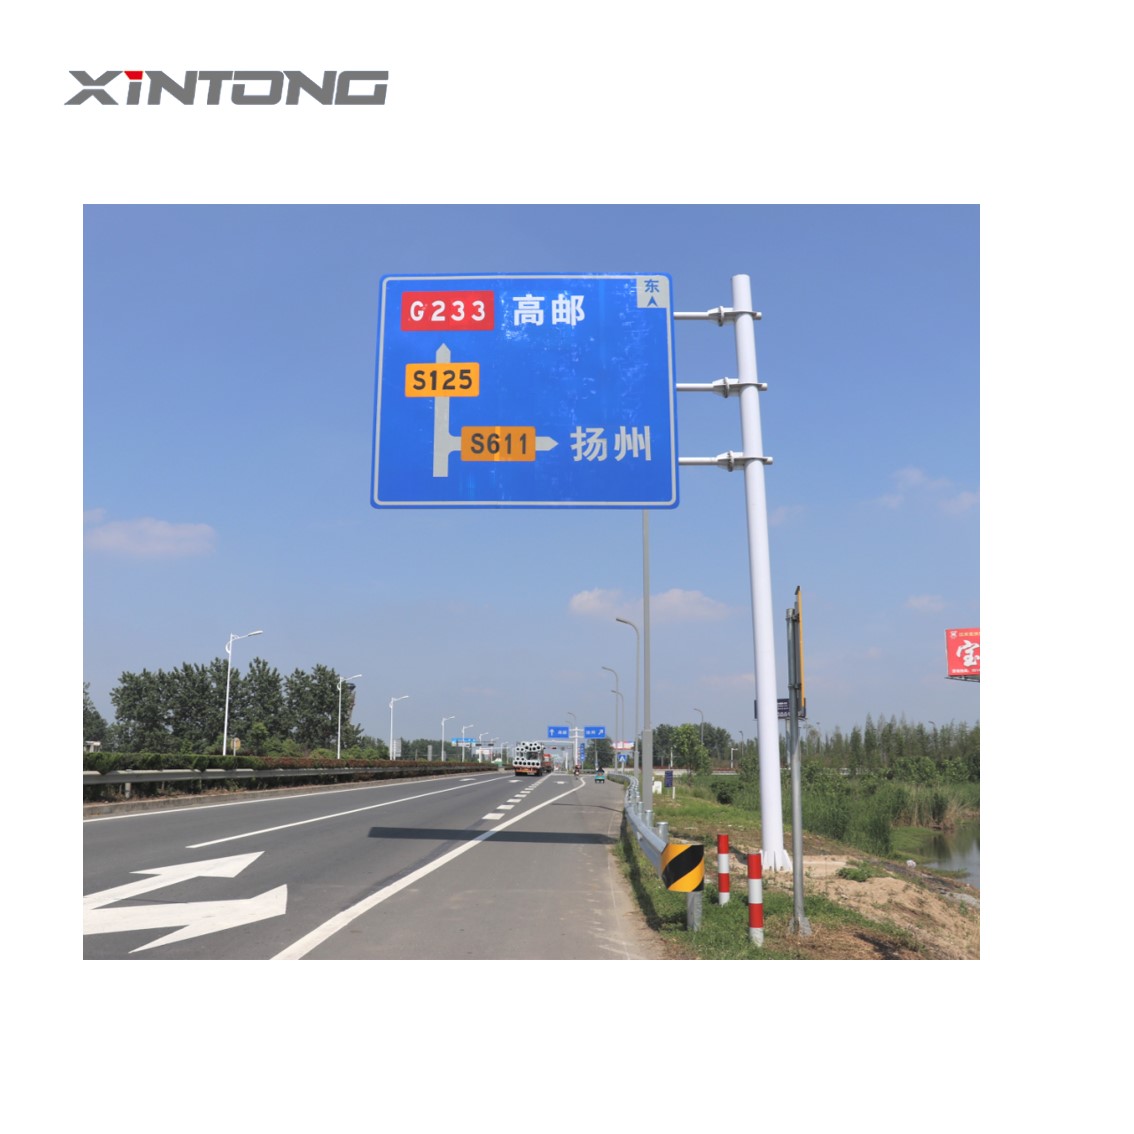 Highly Advanced Traffic System Controller Manufacturer: A Breakthrough in Traffic Management Technology